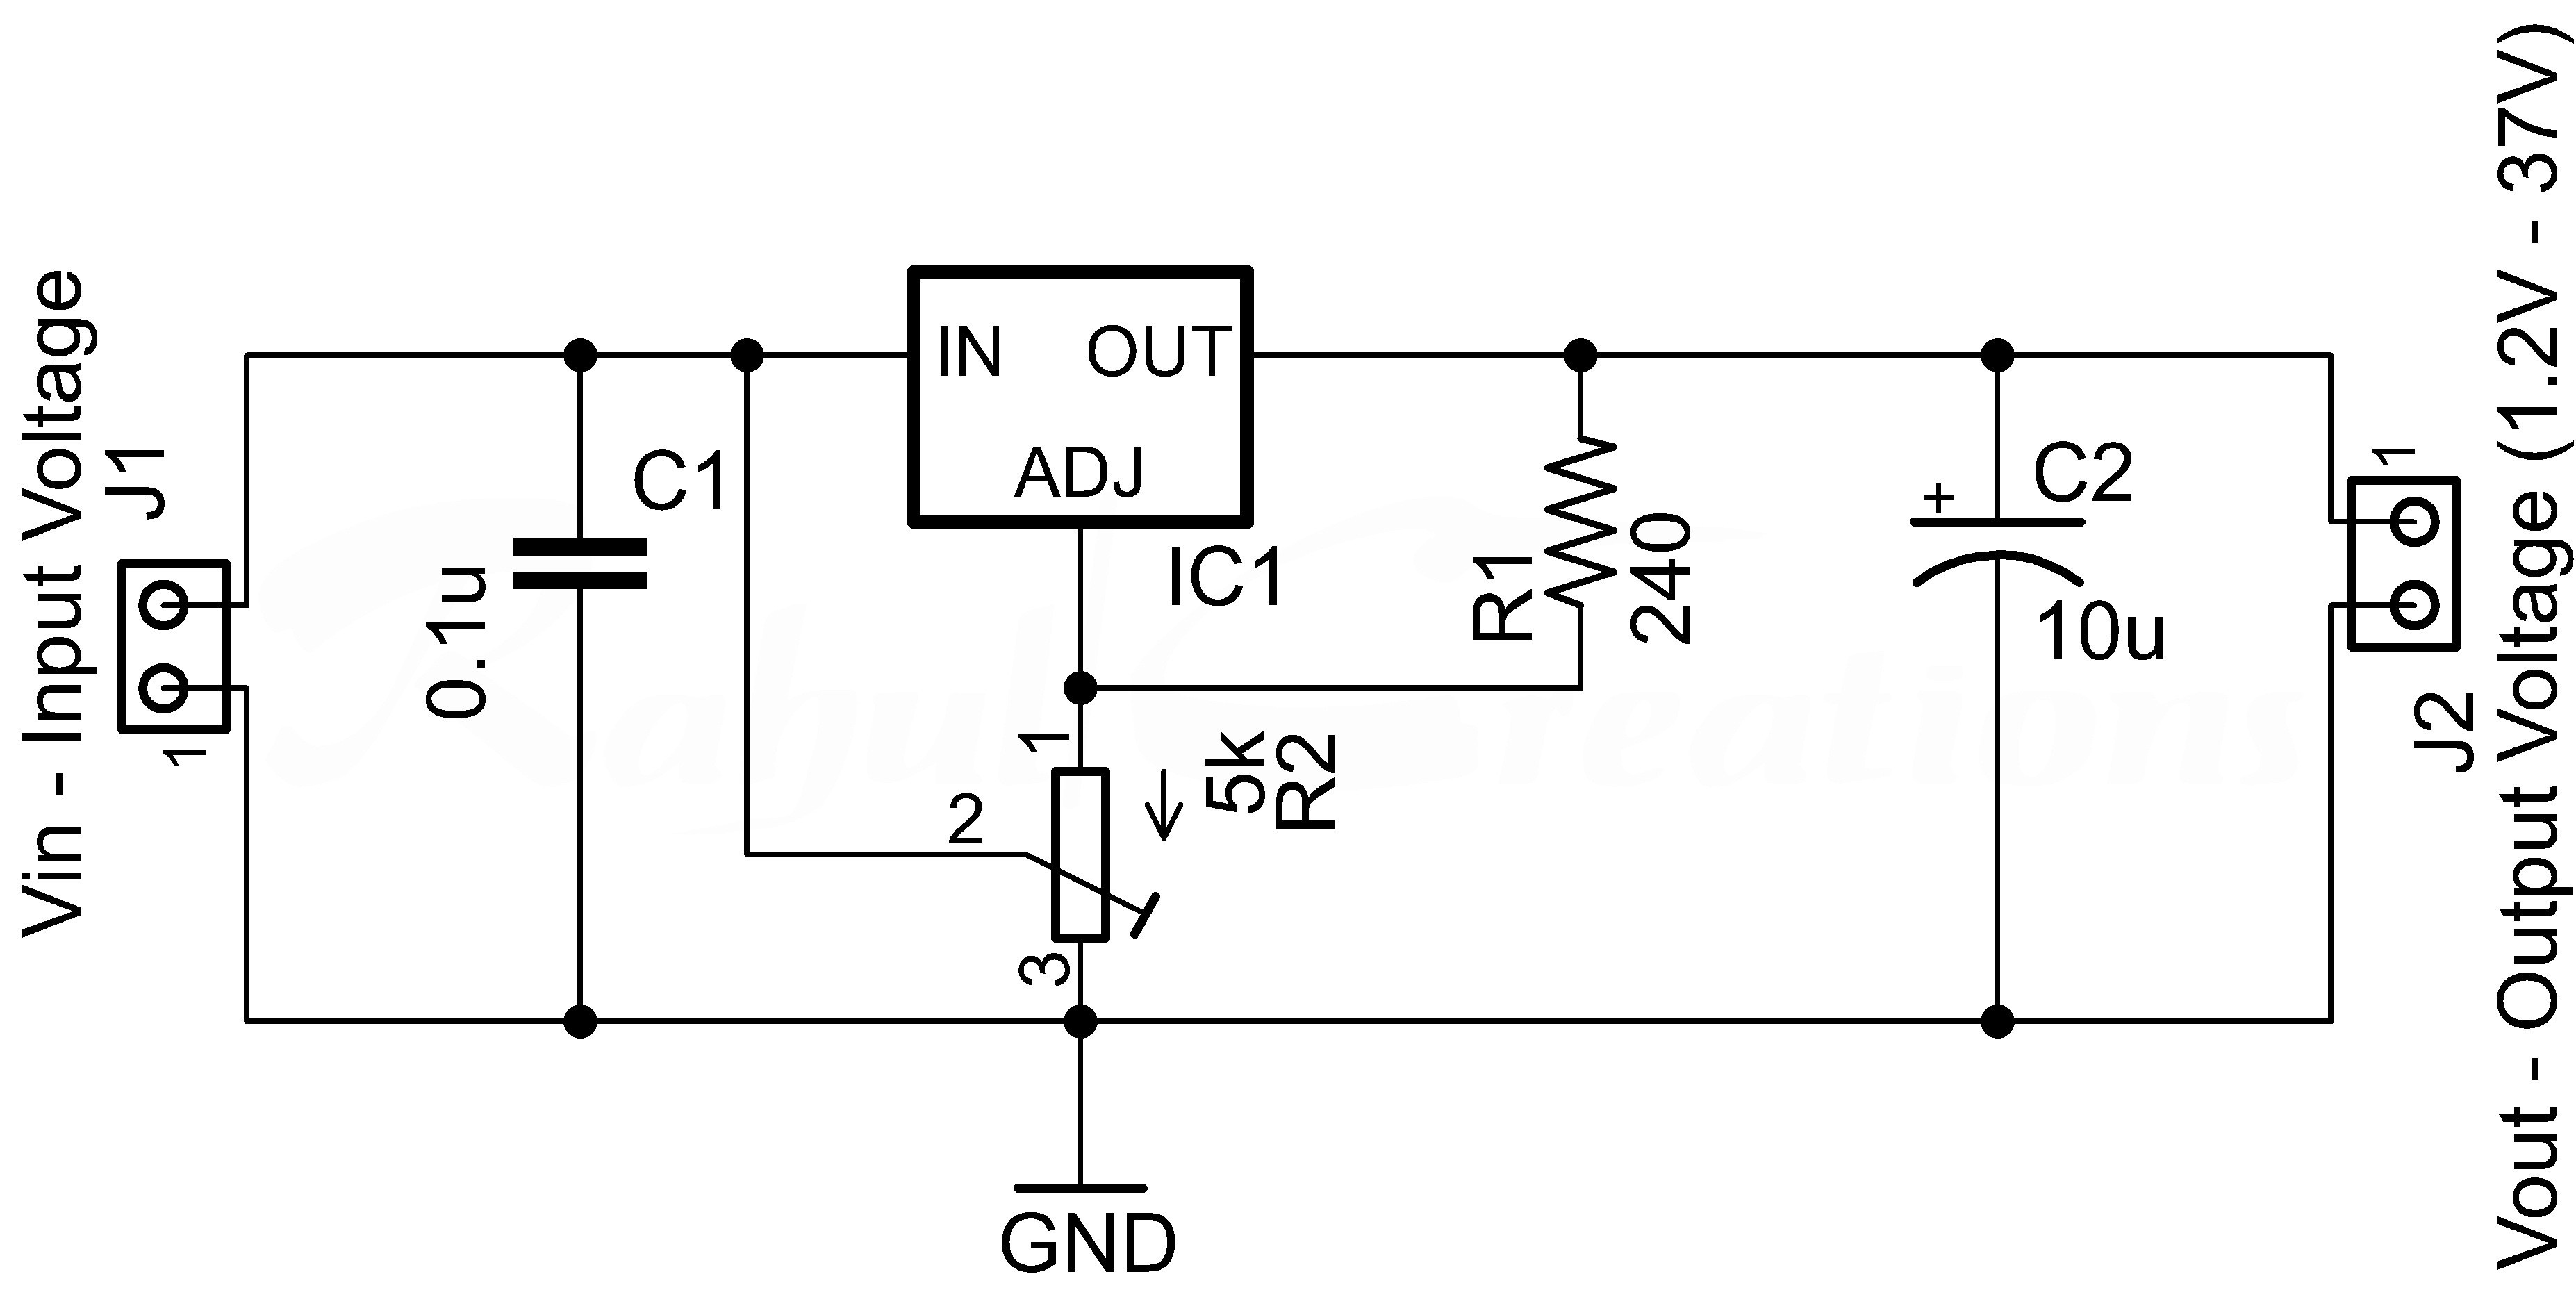 Amplifier Circuit Diagram Best Stunning Efy Circuits Diagrams Contemporary Electrical Circuit